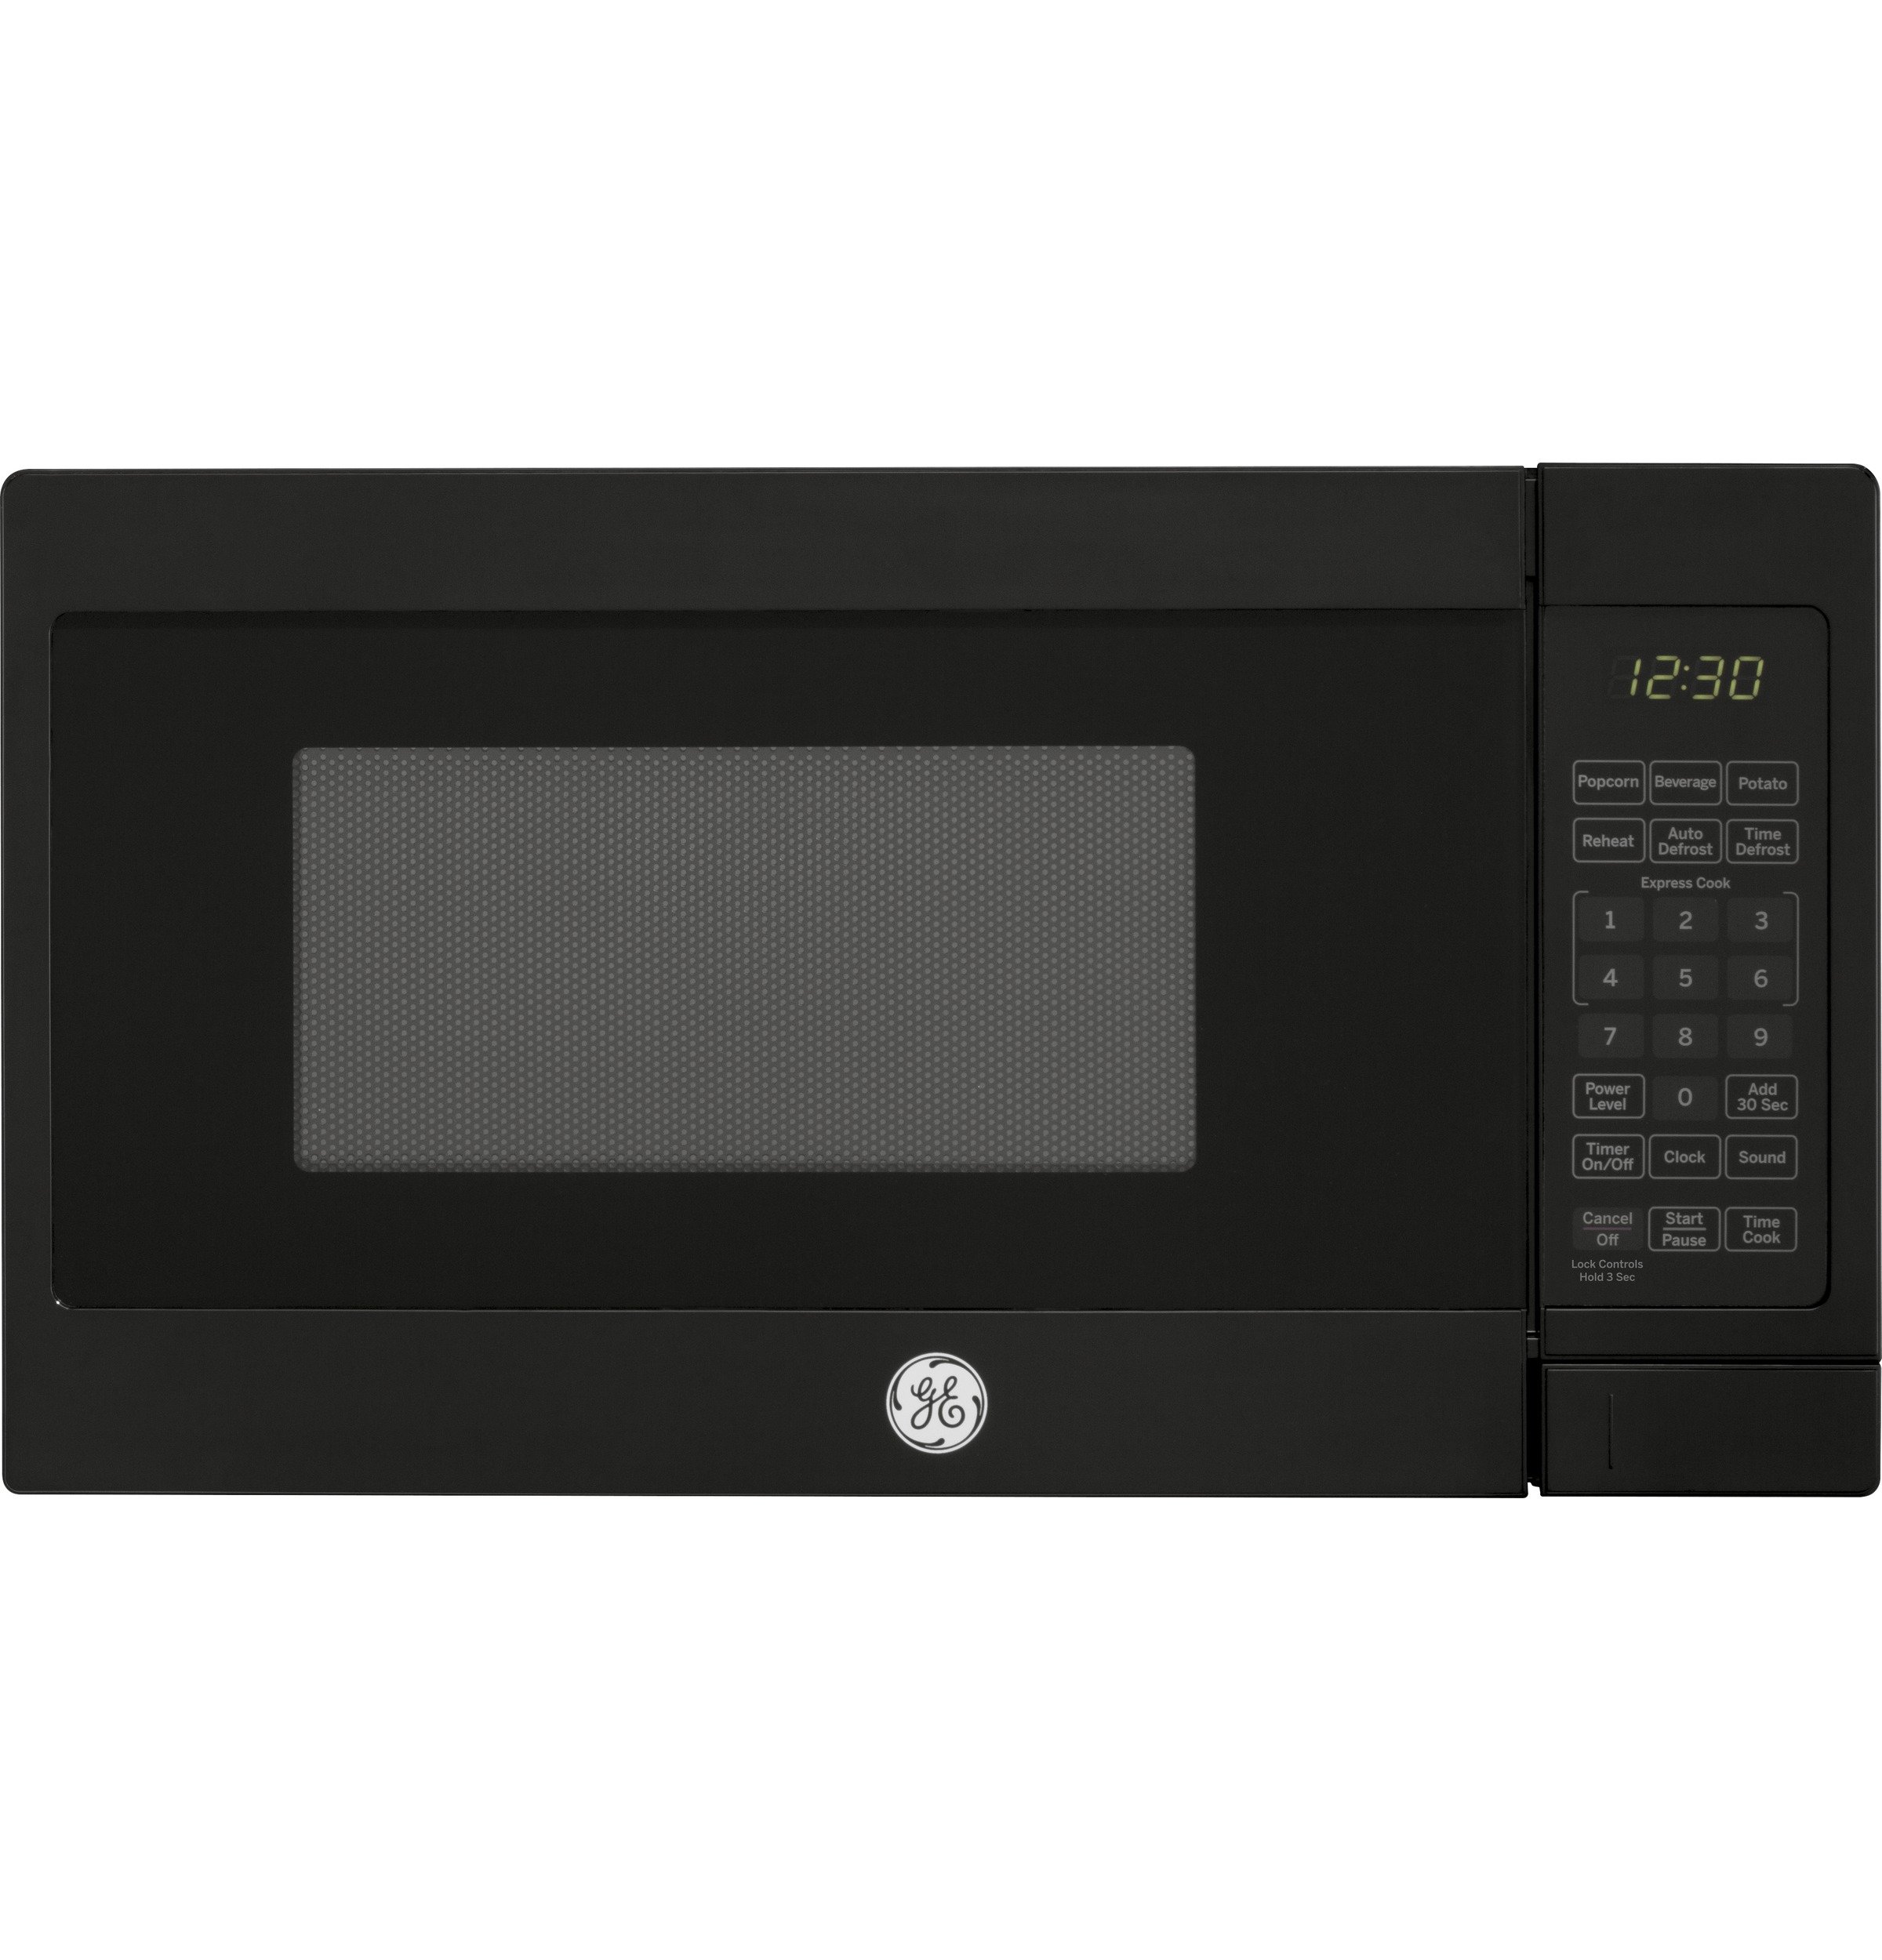 GE Countertop Microwave Oven | 0.7 Cubic Feet Capacity, 700 Watts | Kitchen Essentials for The Countertop or Dorm Room